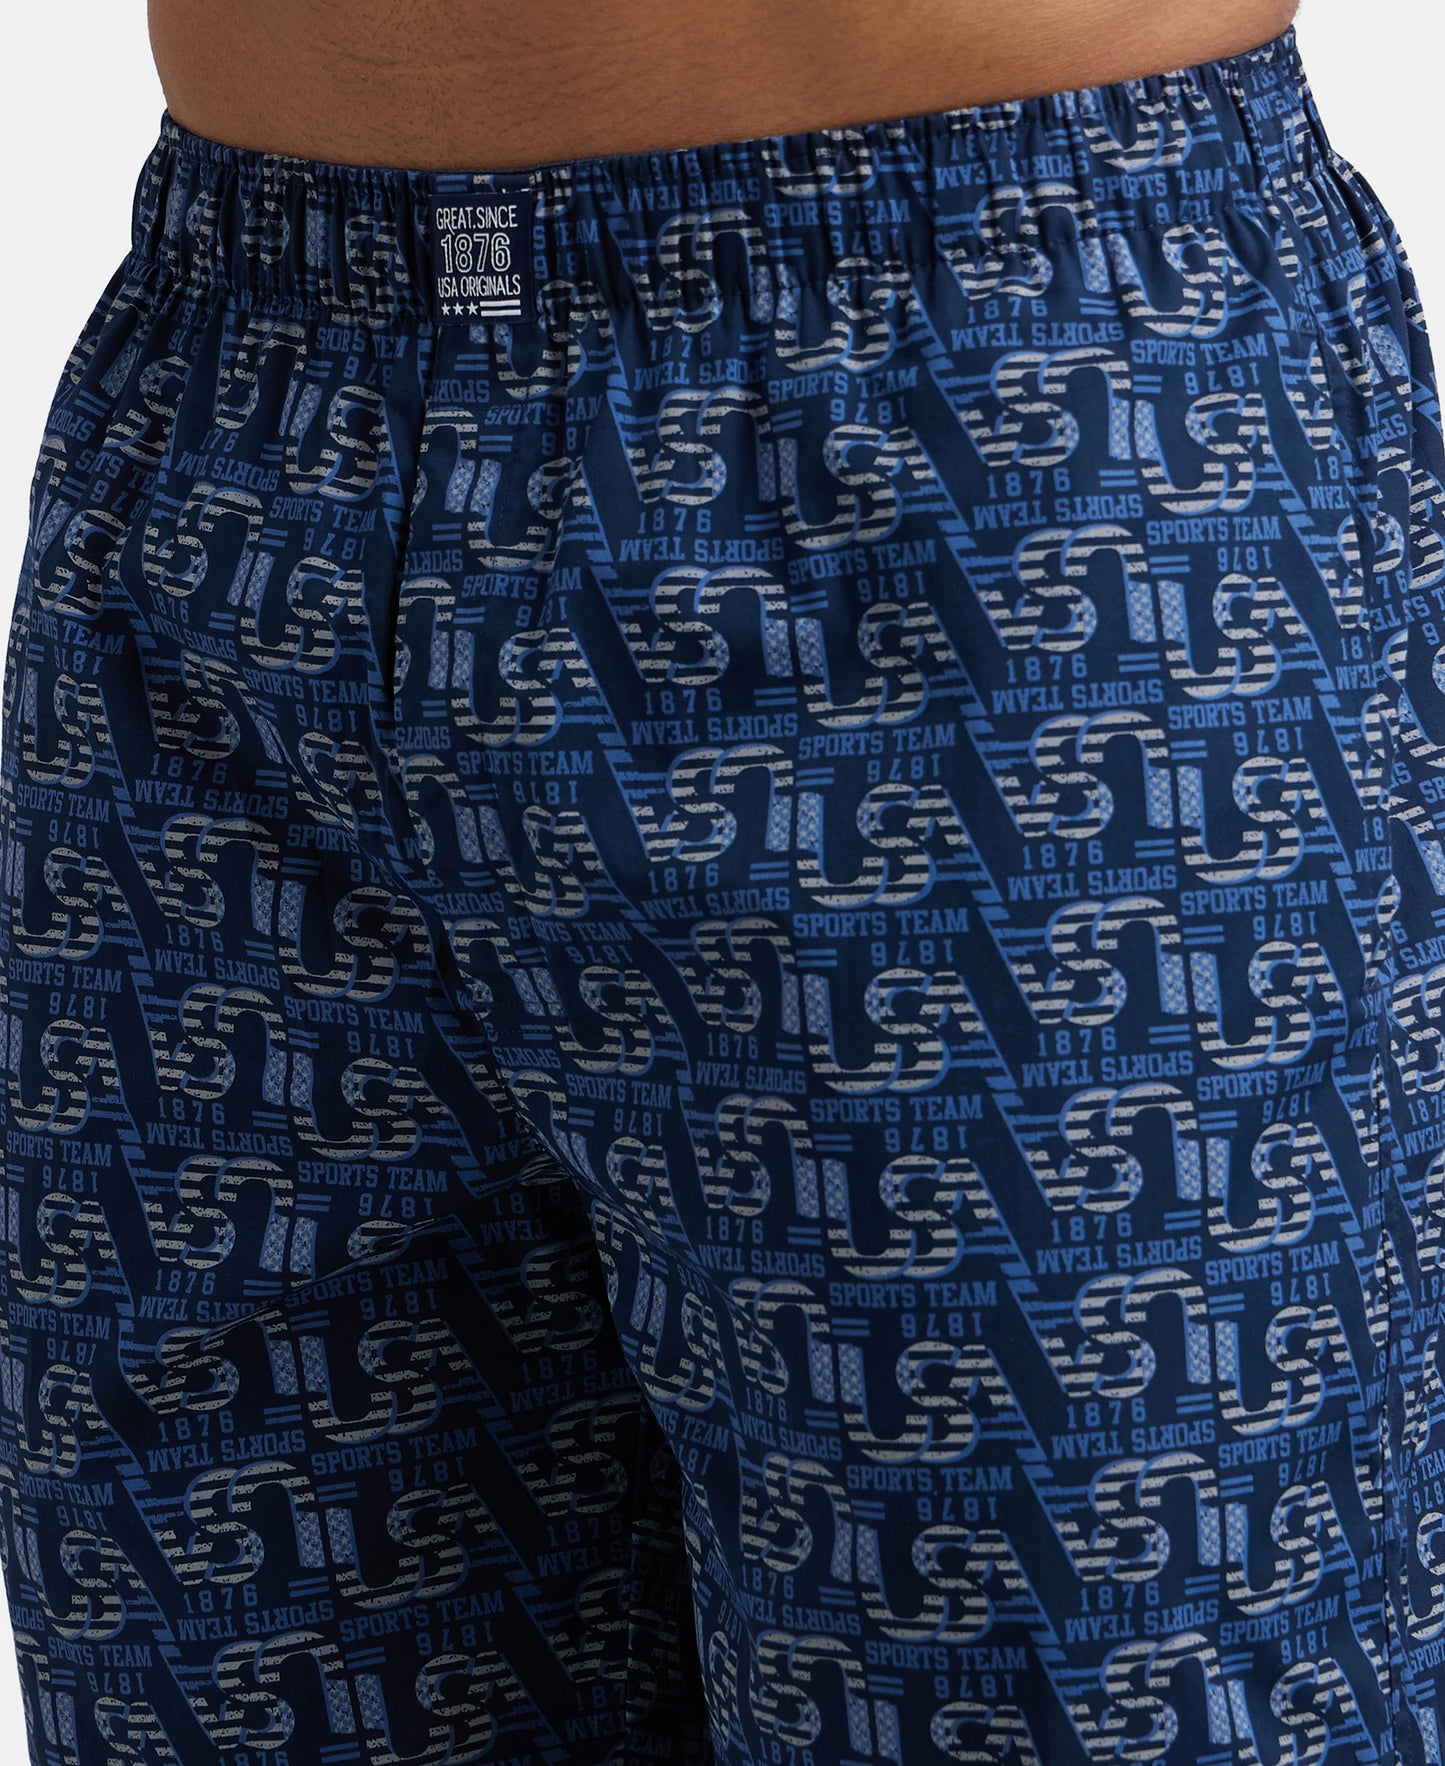 Super Combed Mercerized Cotton Woven Printed Boxer Shorts with Side Pocket - Navy Nickle-14